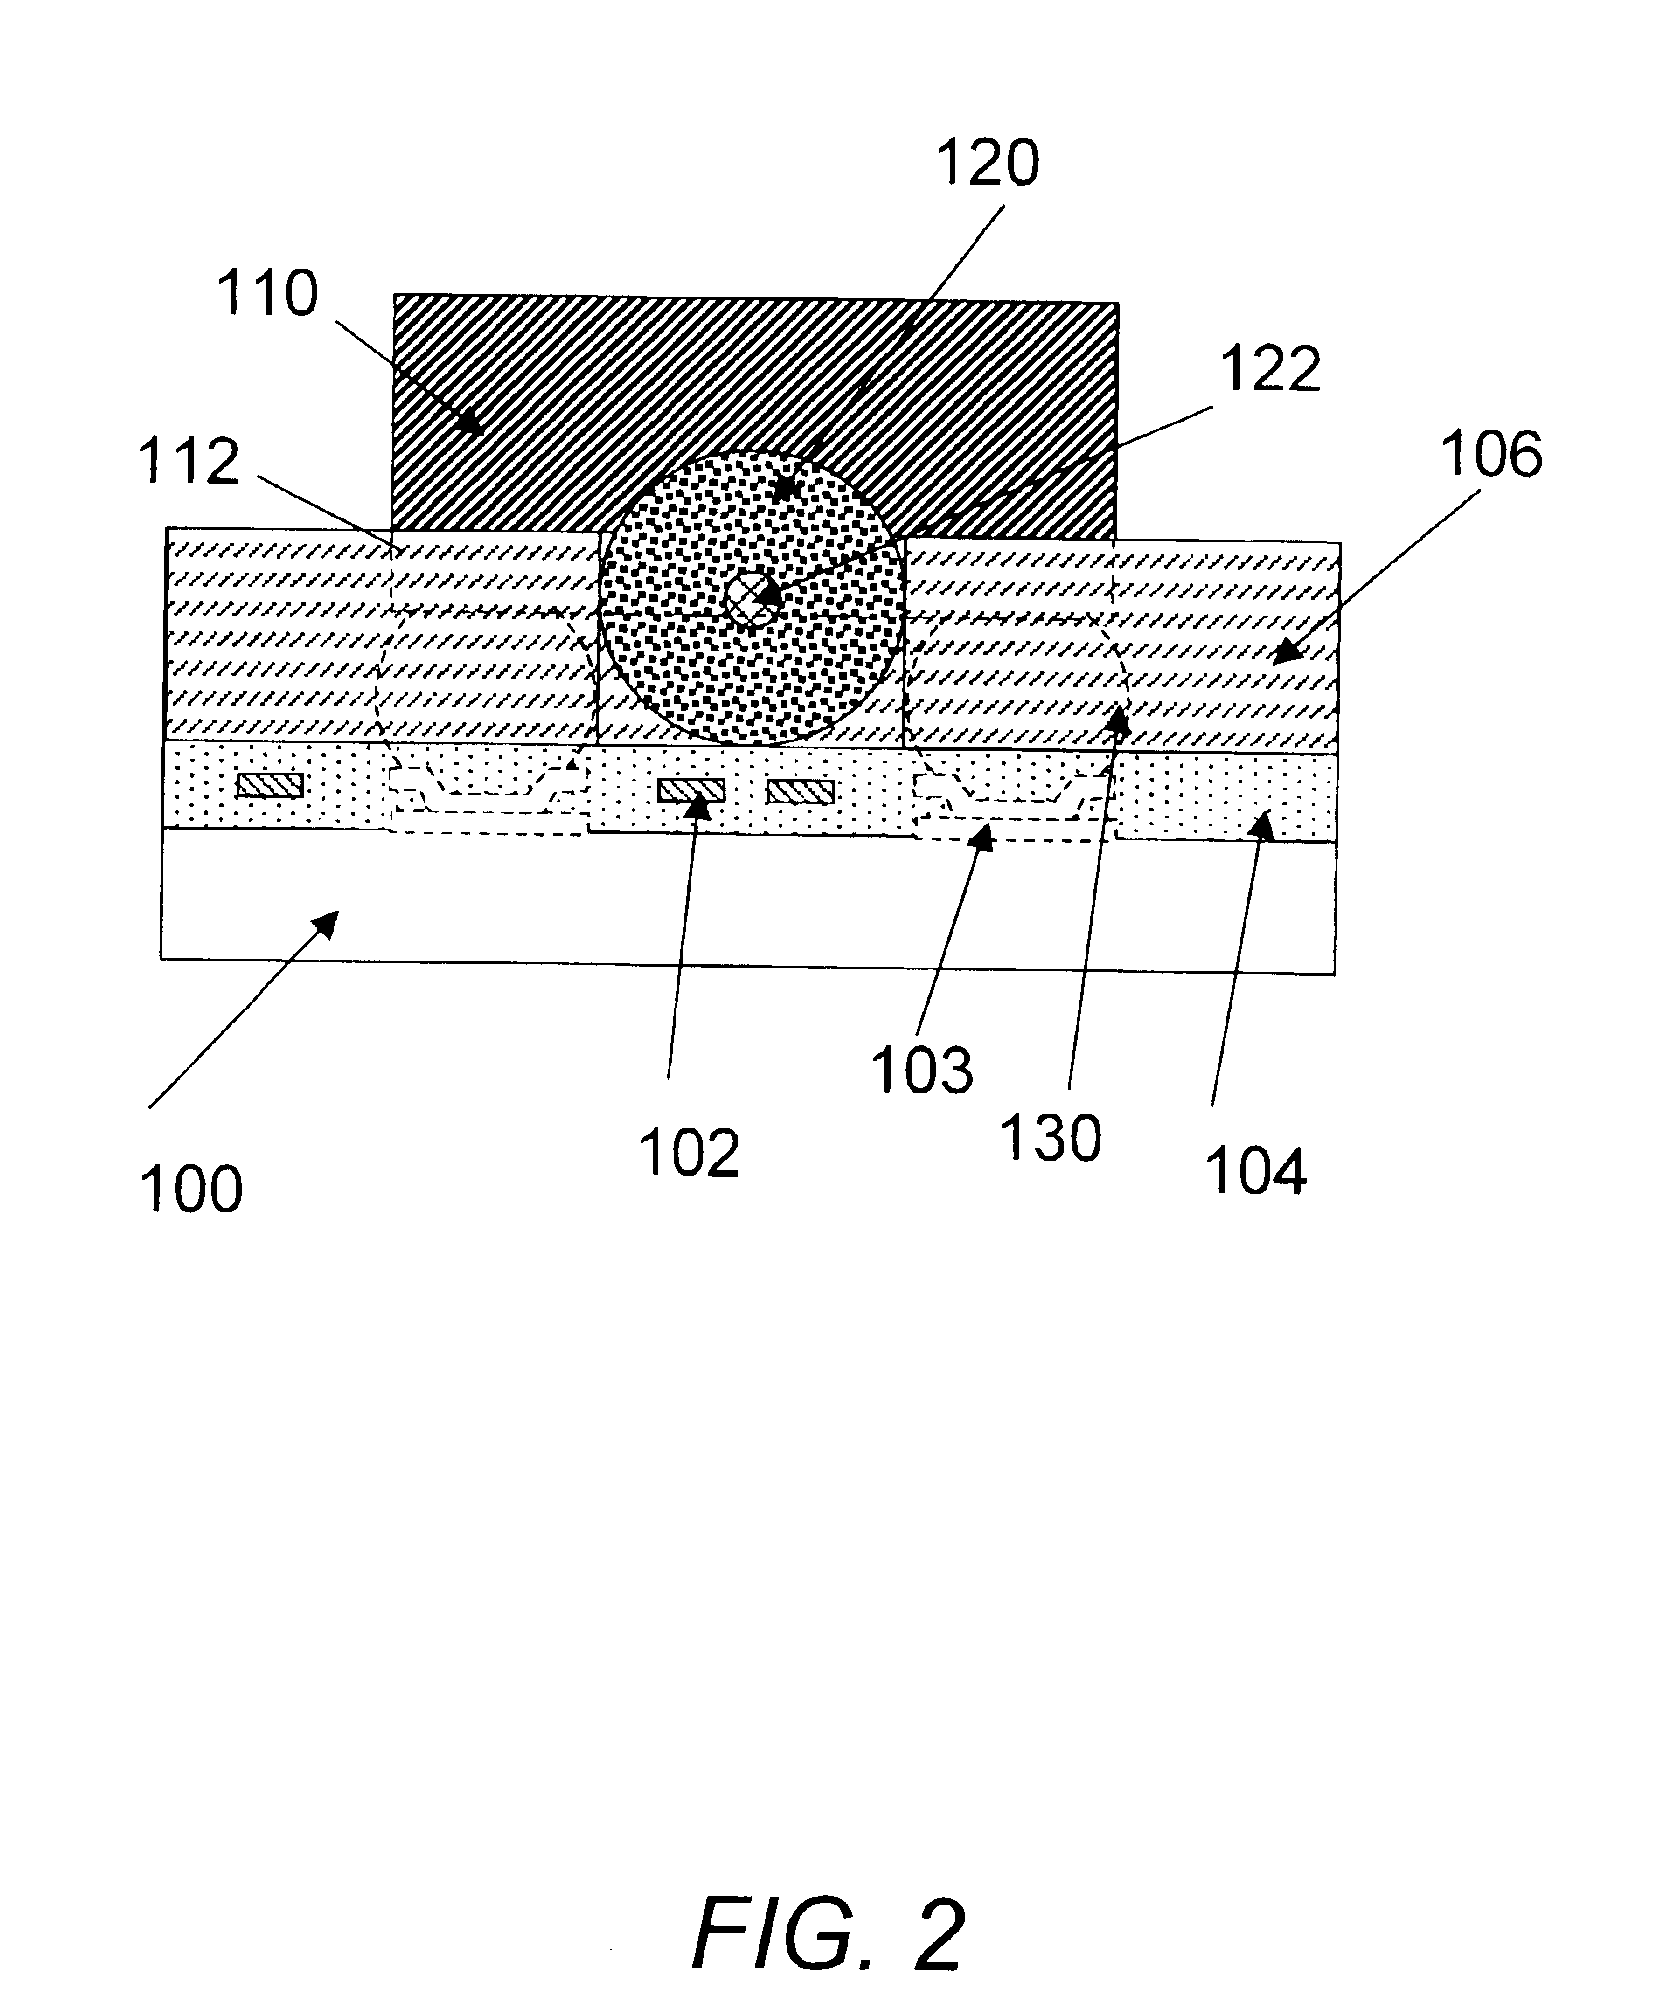 Optoelectronic assembly with embedded optical and electrical components